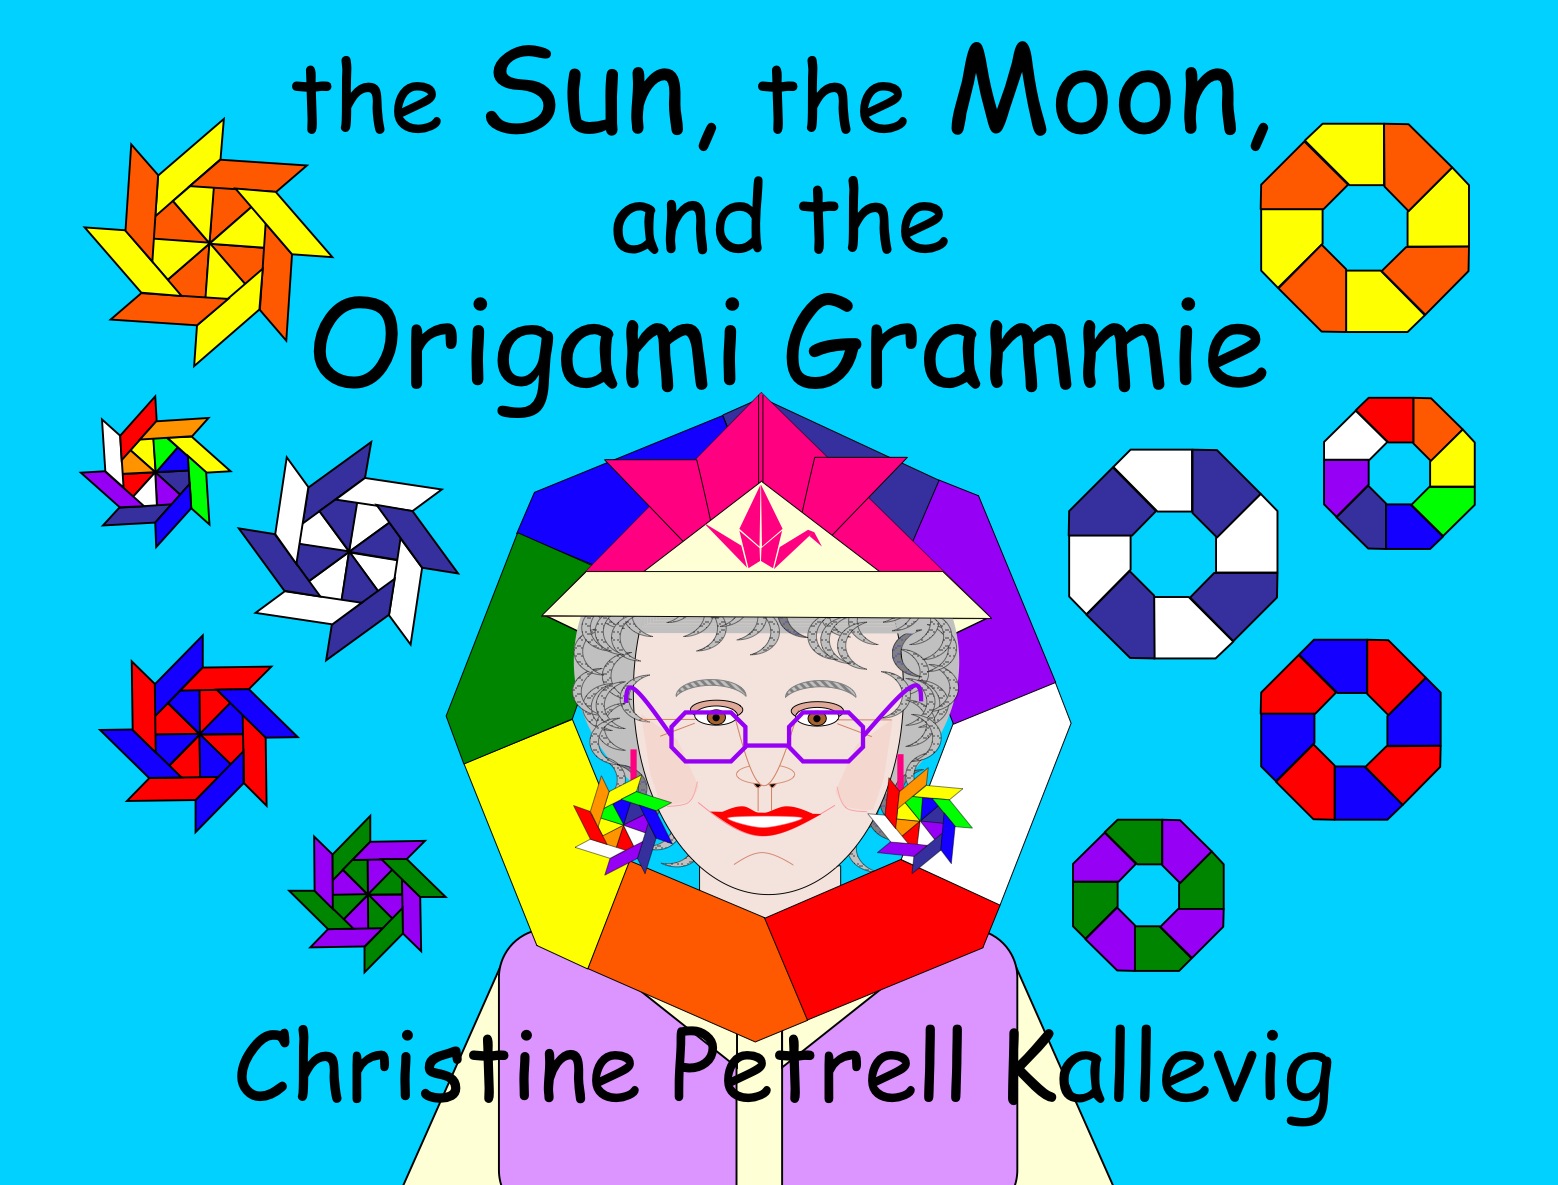 the Sun, the Moon, and the Origami Grammie by Christine Petrell Kallevig